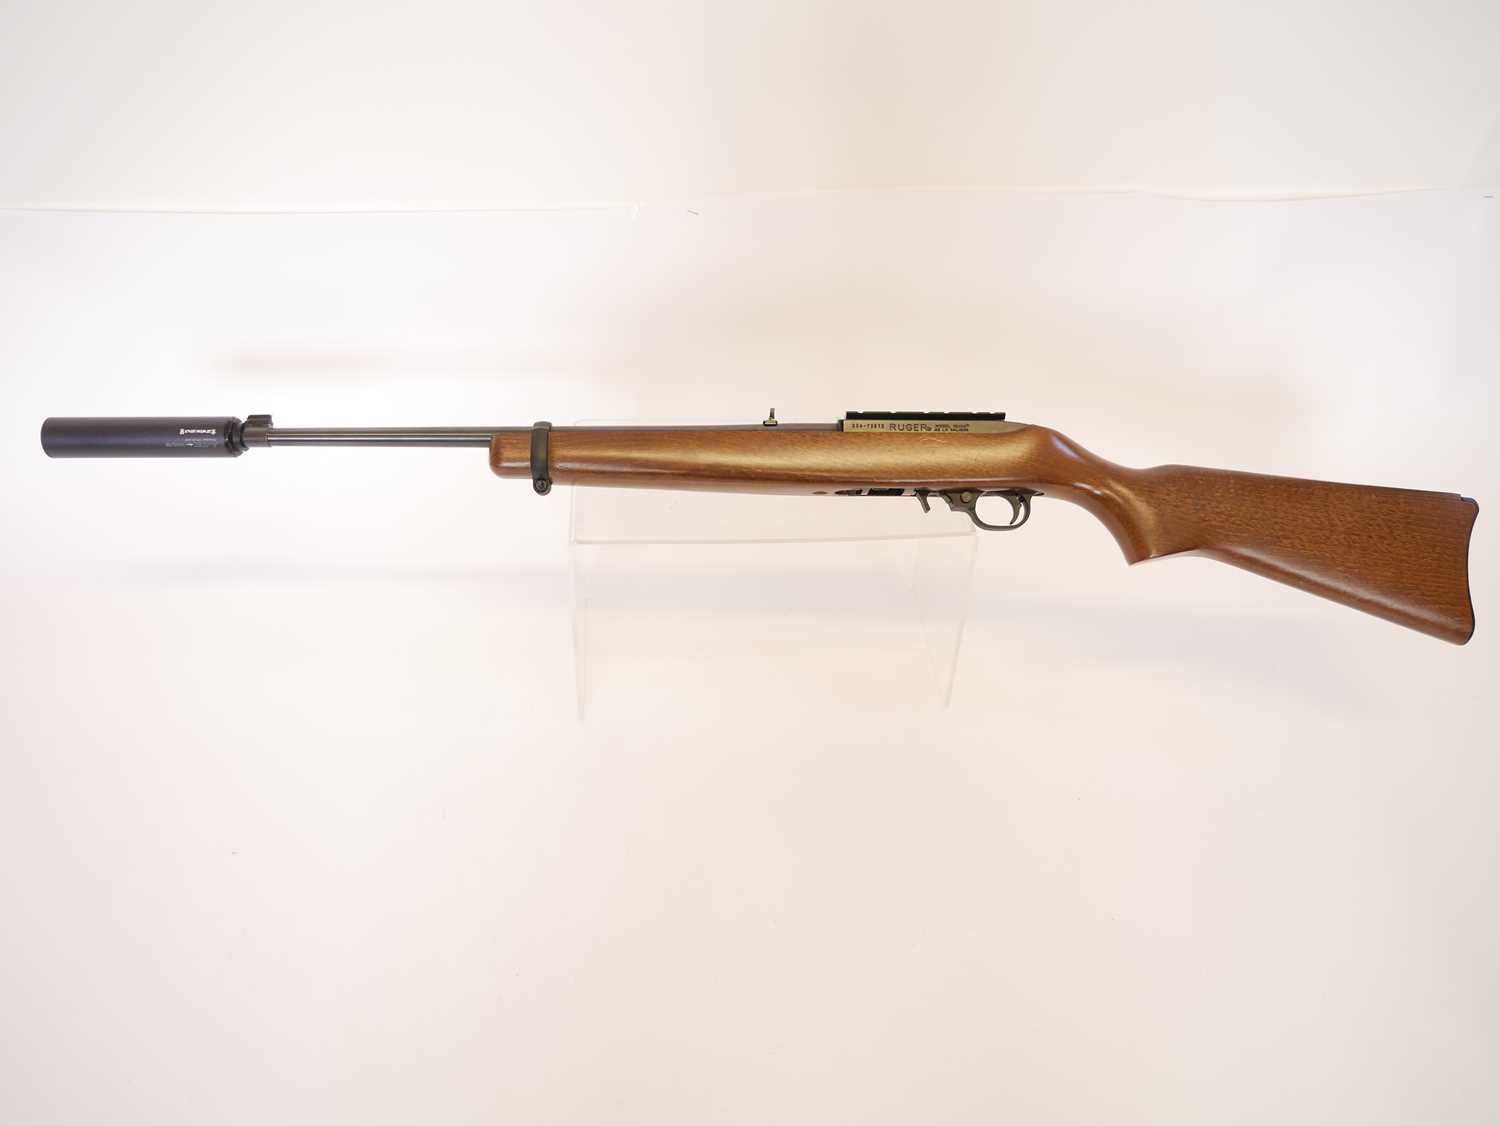 Ruger 10-22 .22lr semi auto rifle and moderator, serial number 356-73813, 16.5inch barrel fitted - Image 11 of 11